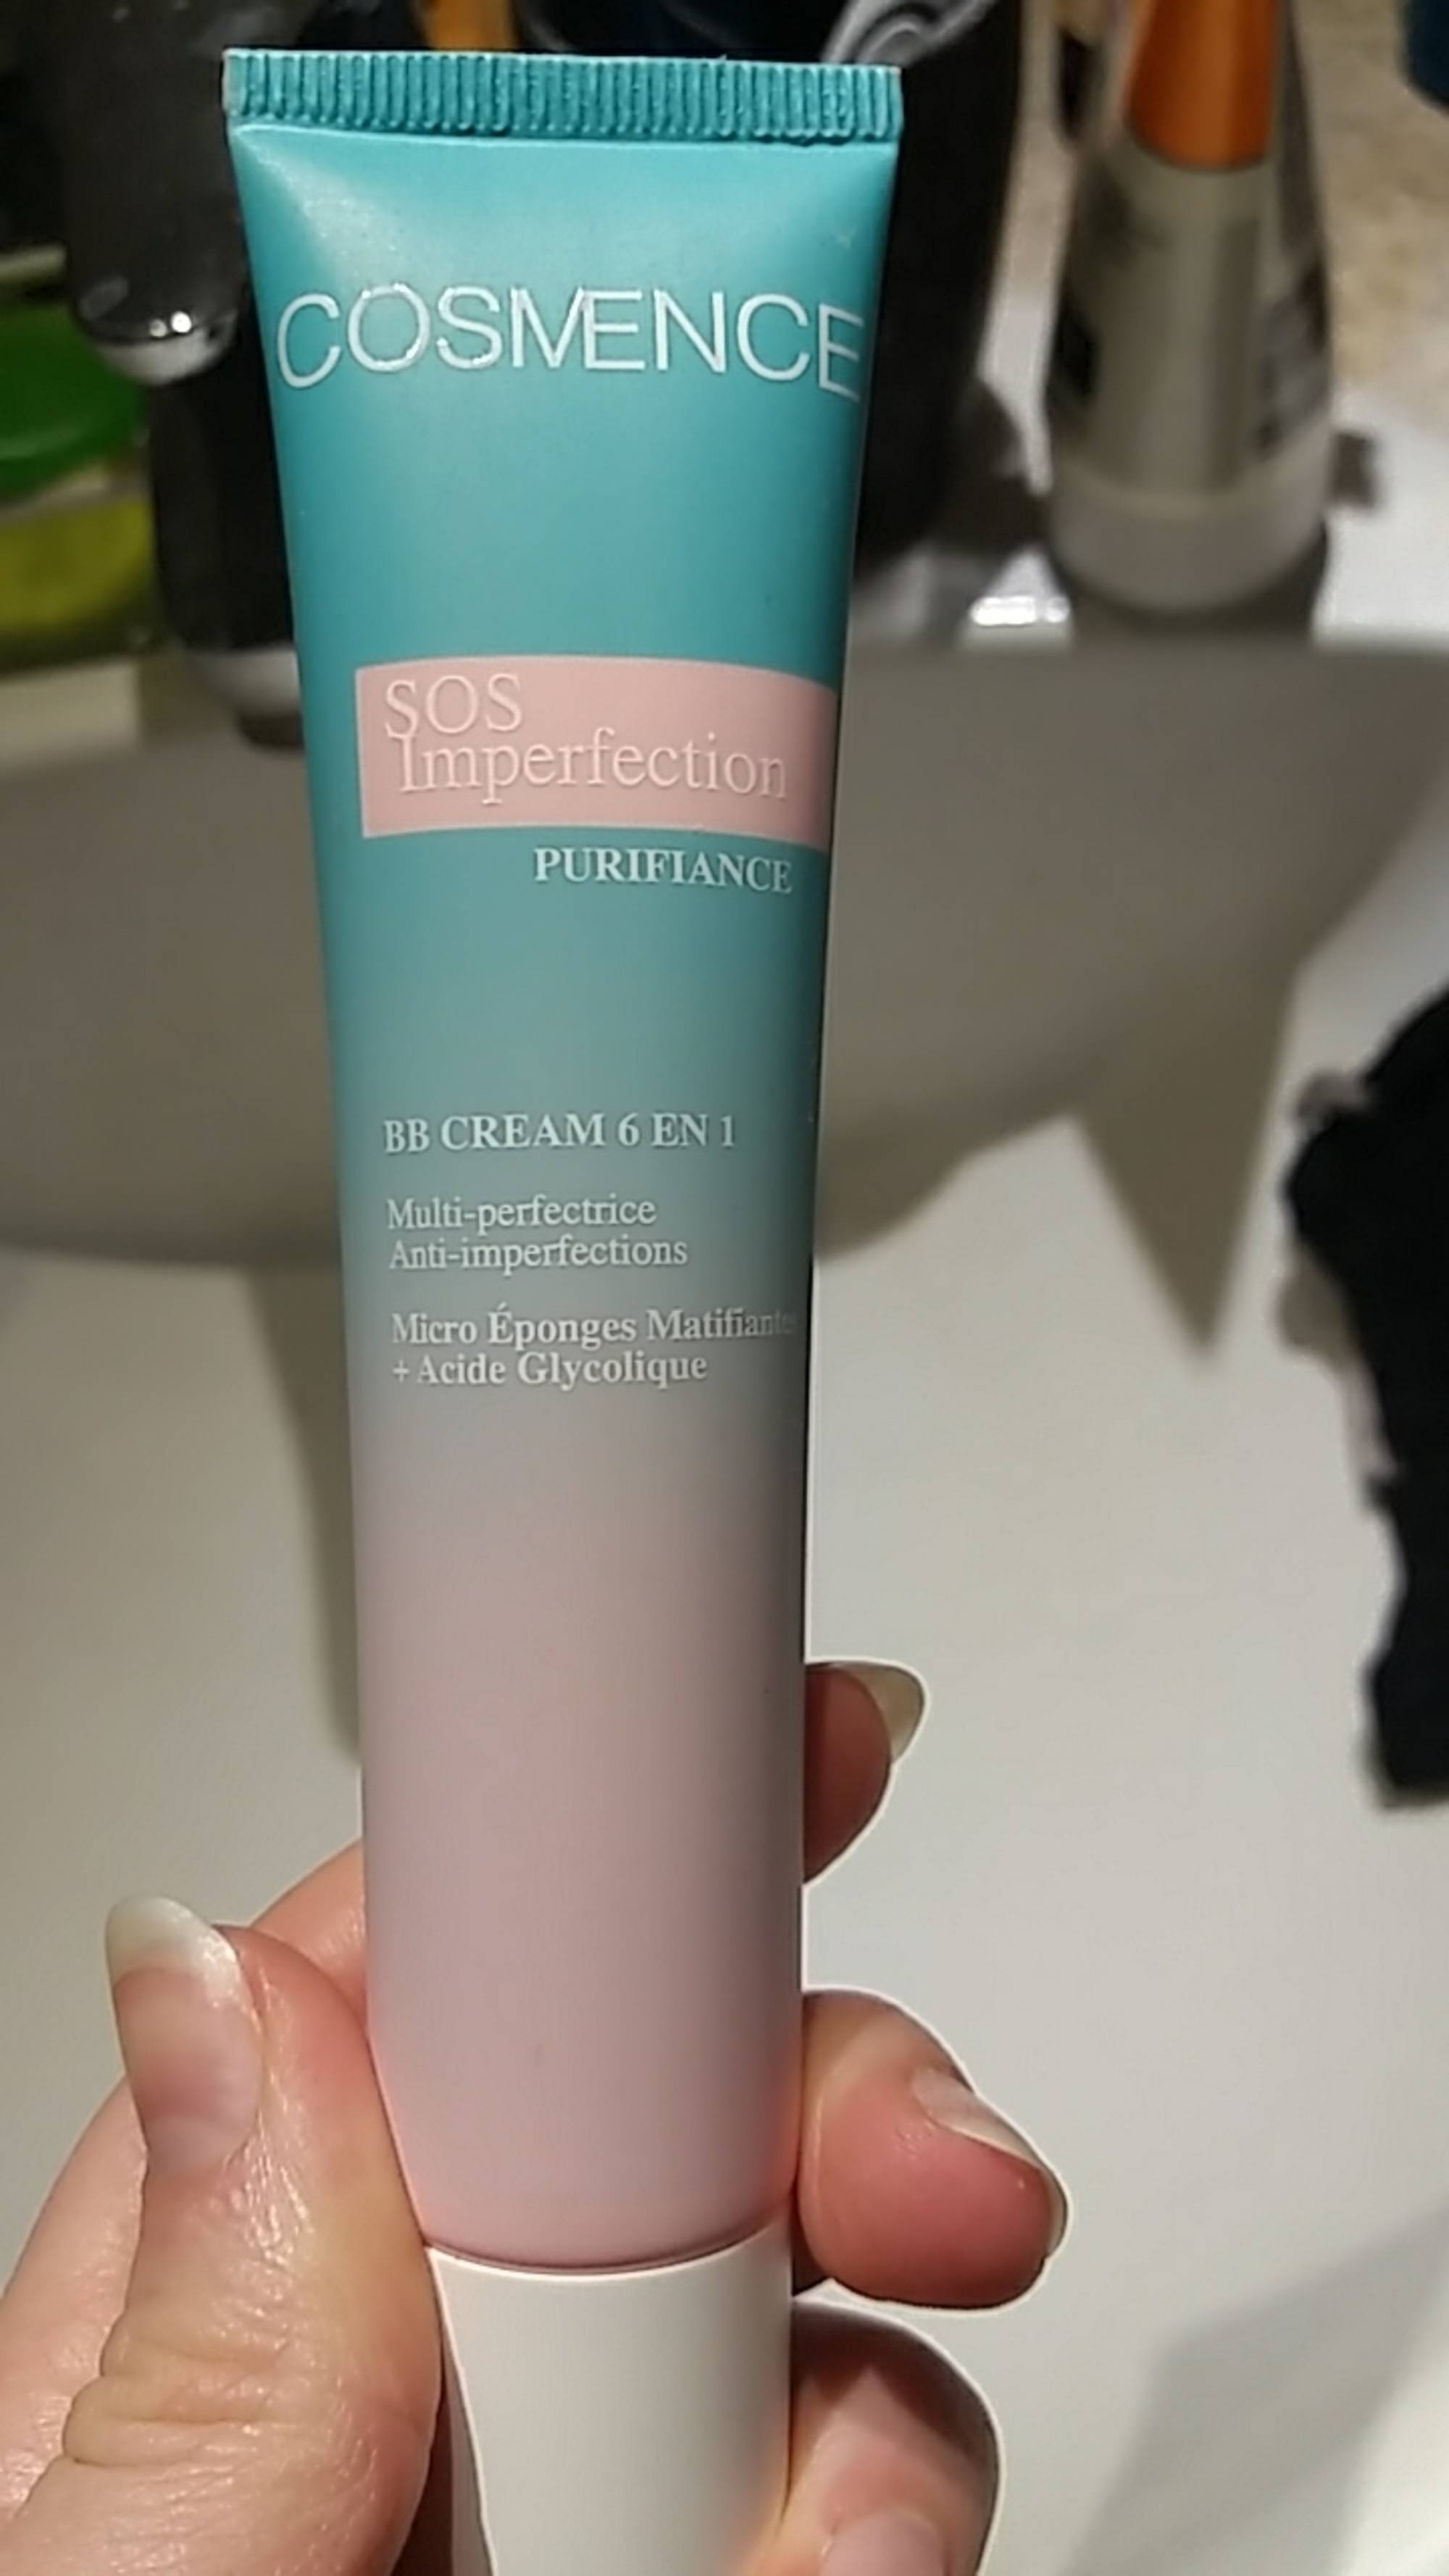 COSMENCE - Sos imperfection purifiance - BB cream 6 en 1